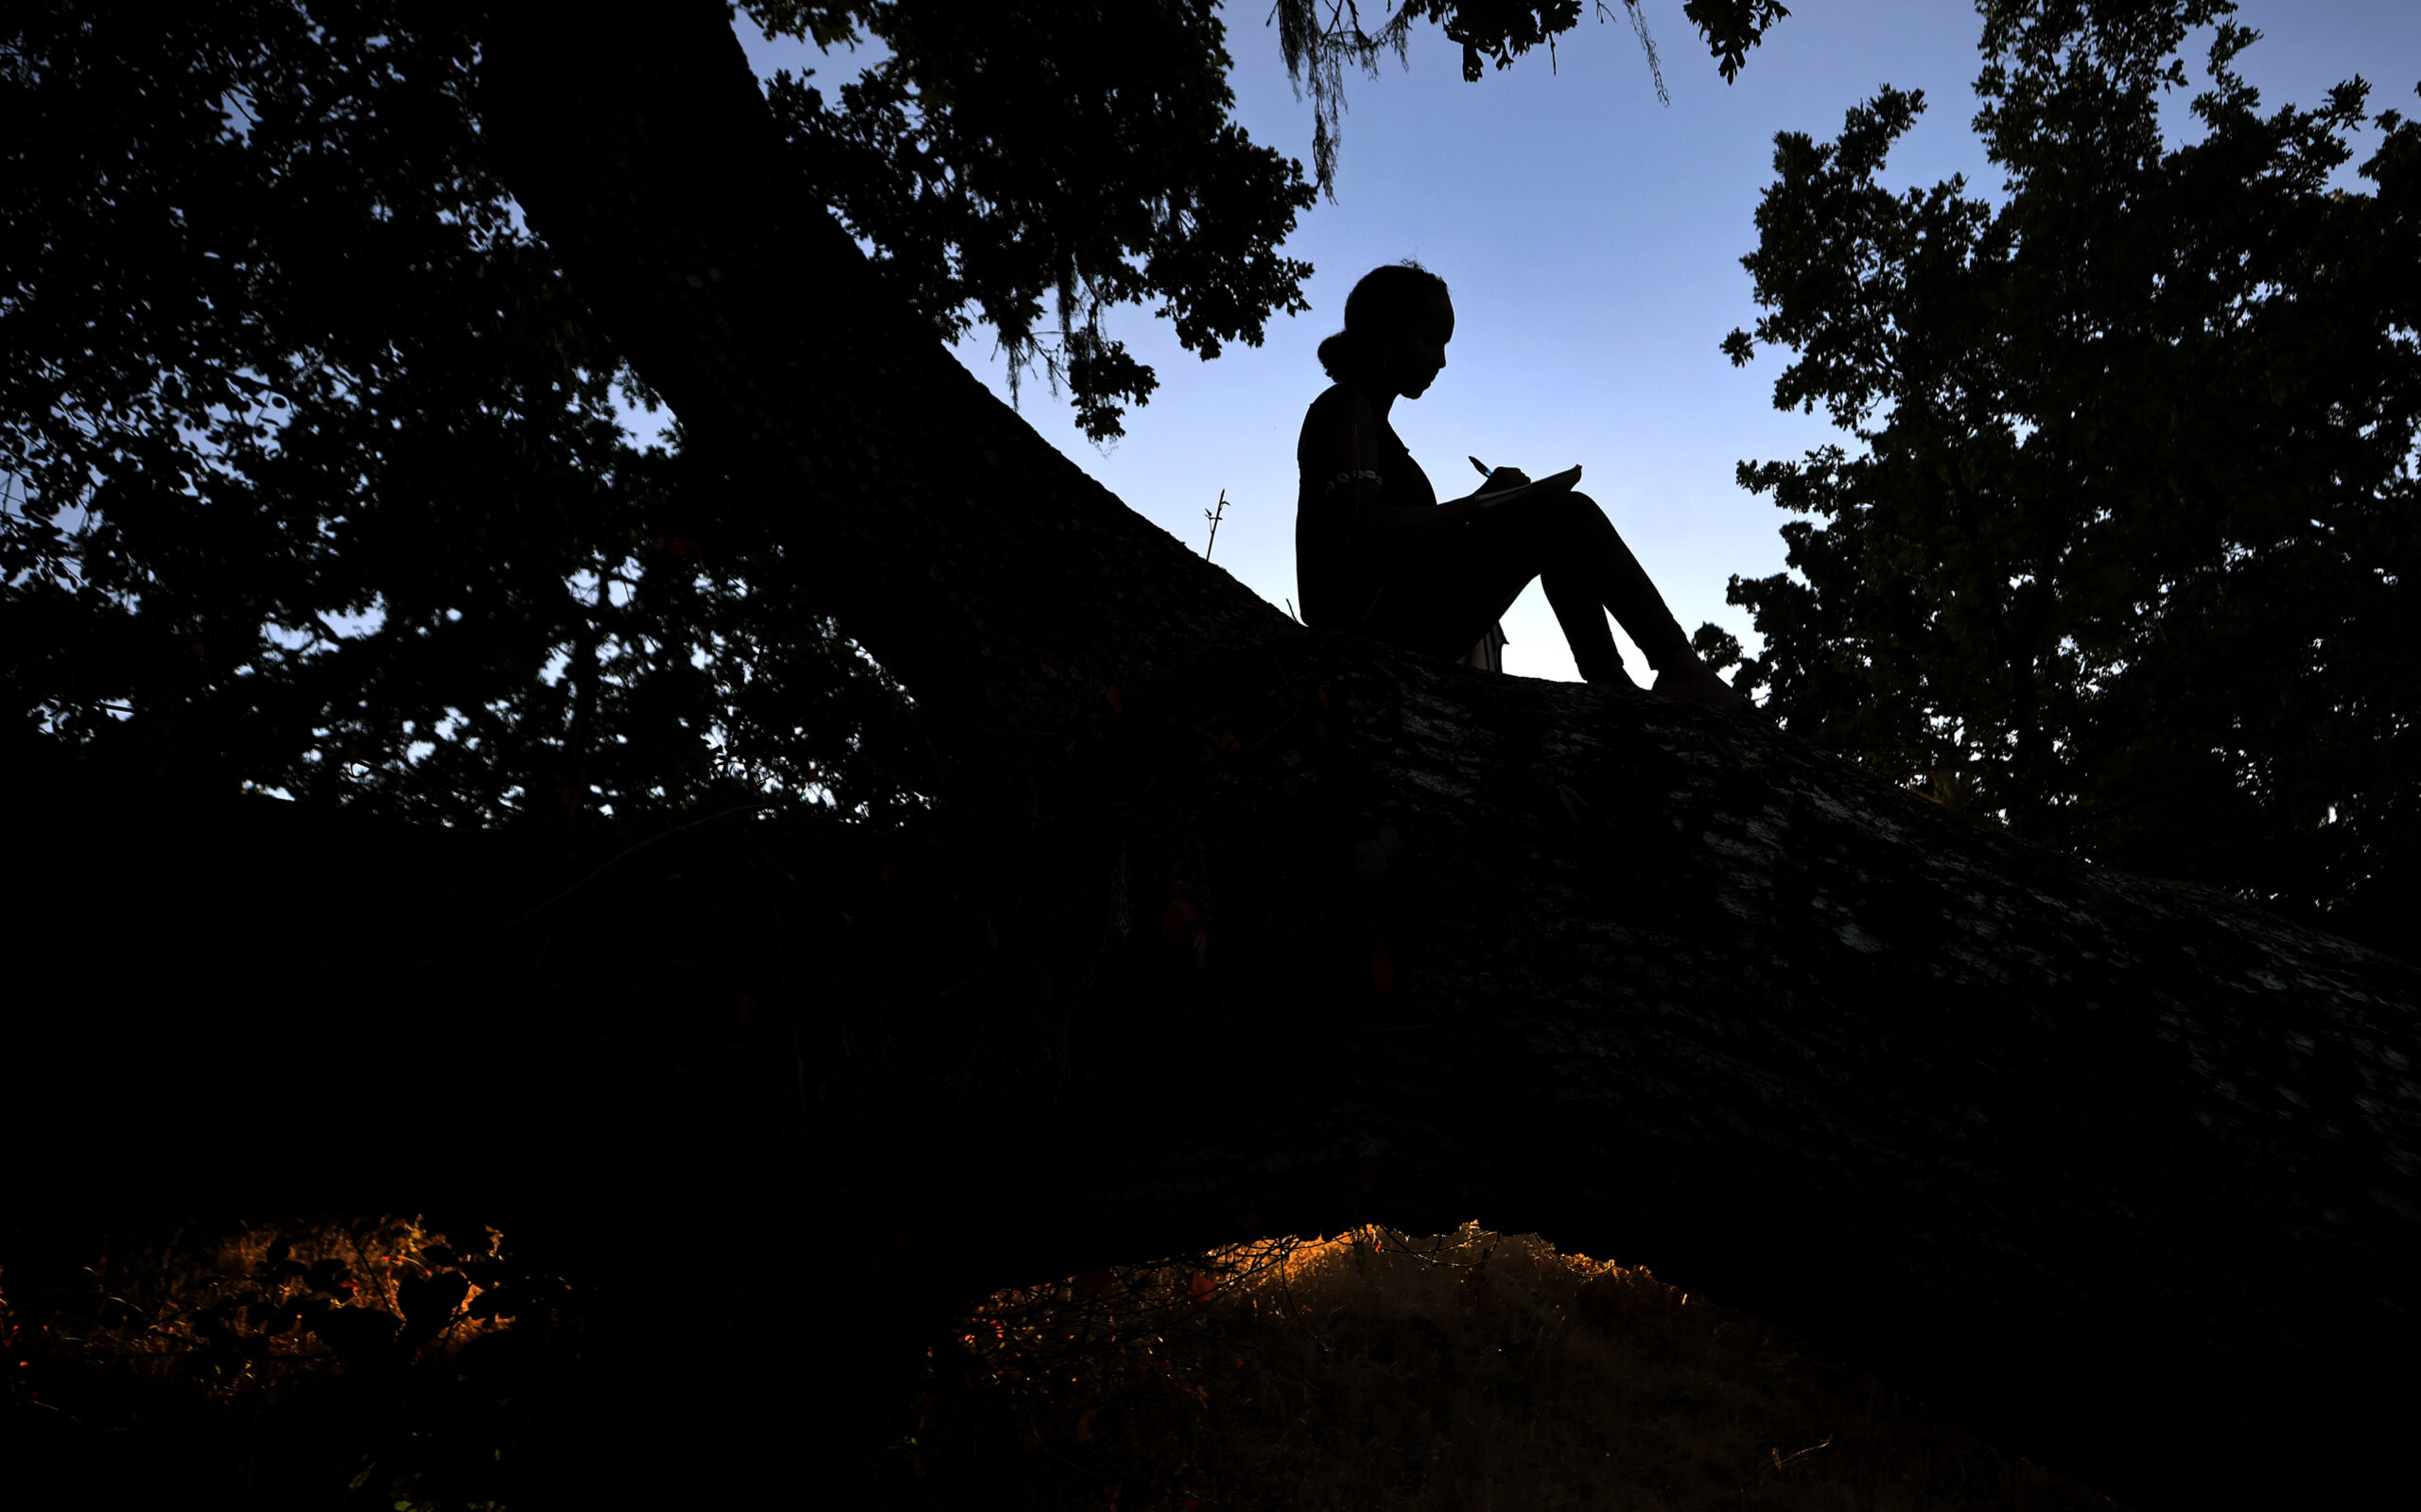 Shugri Salh has a favorite spot in the branches of a tree in Crane Creek Regional Park, where she goes to walk, write and mediate. (Kent Porter / The Press Democrat) 